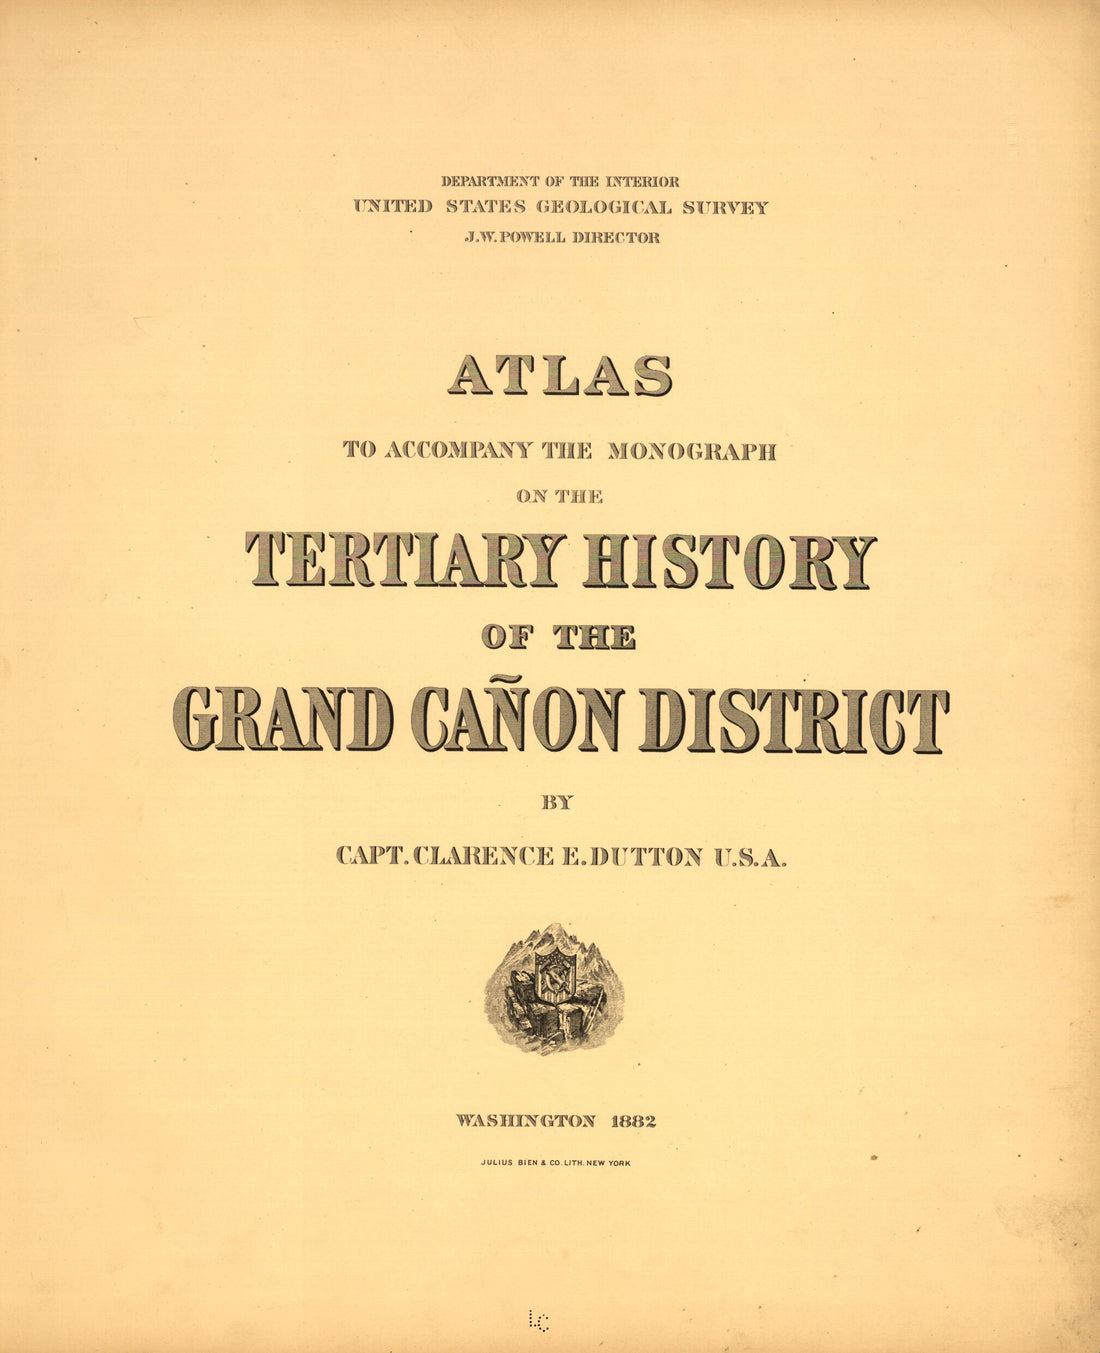 This old map of Tertiary History of the Grand Cañon District, With Atlas, from 1882 was created by Clarence E. (Clarence Edward) Dutton in 1882